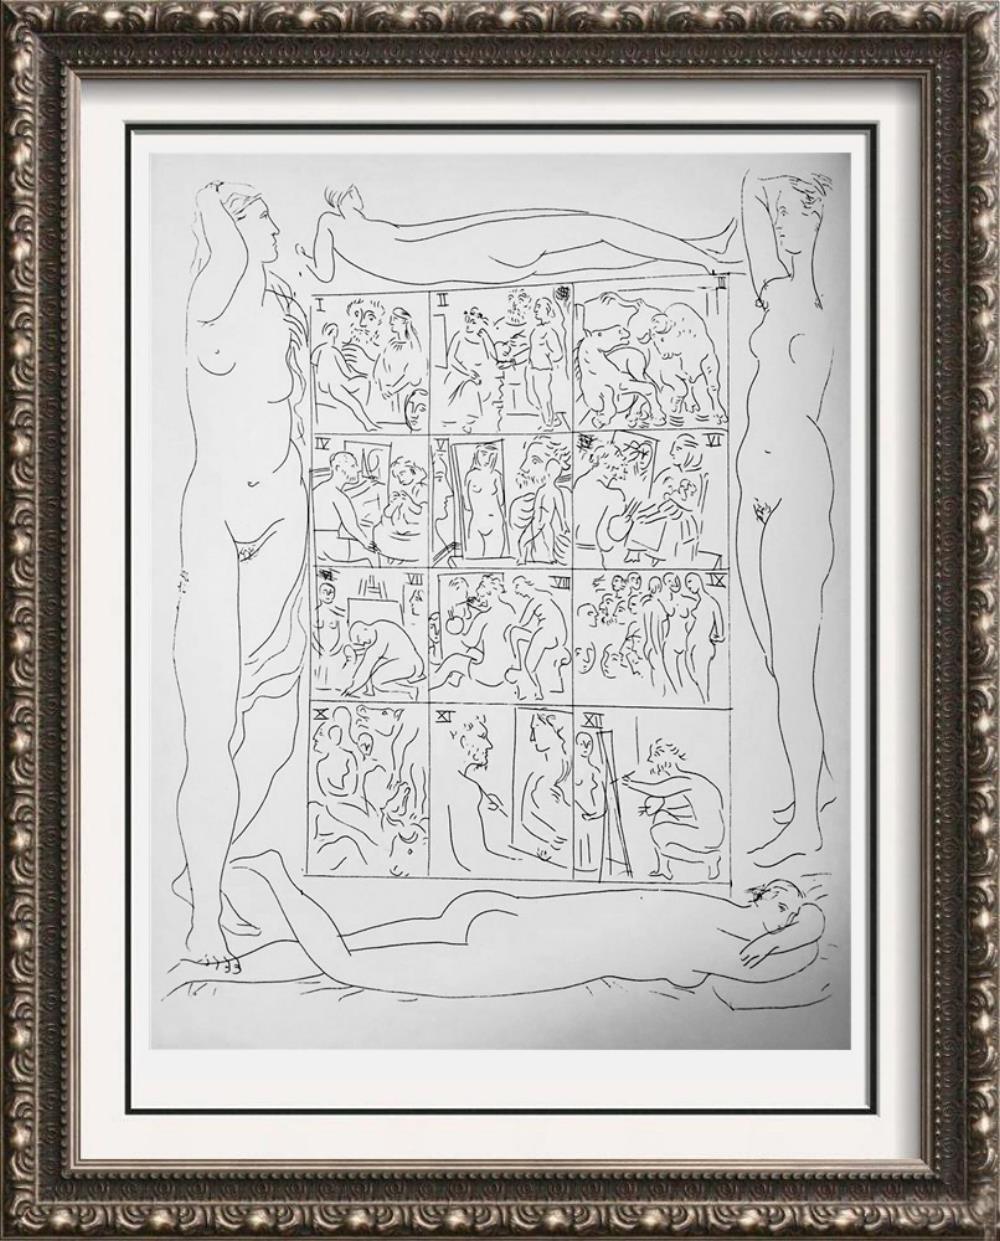 Pablo Picasso Table of Etchings c. 1931 Fine Art Print from Museum Artist